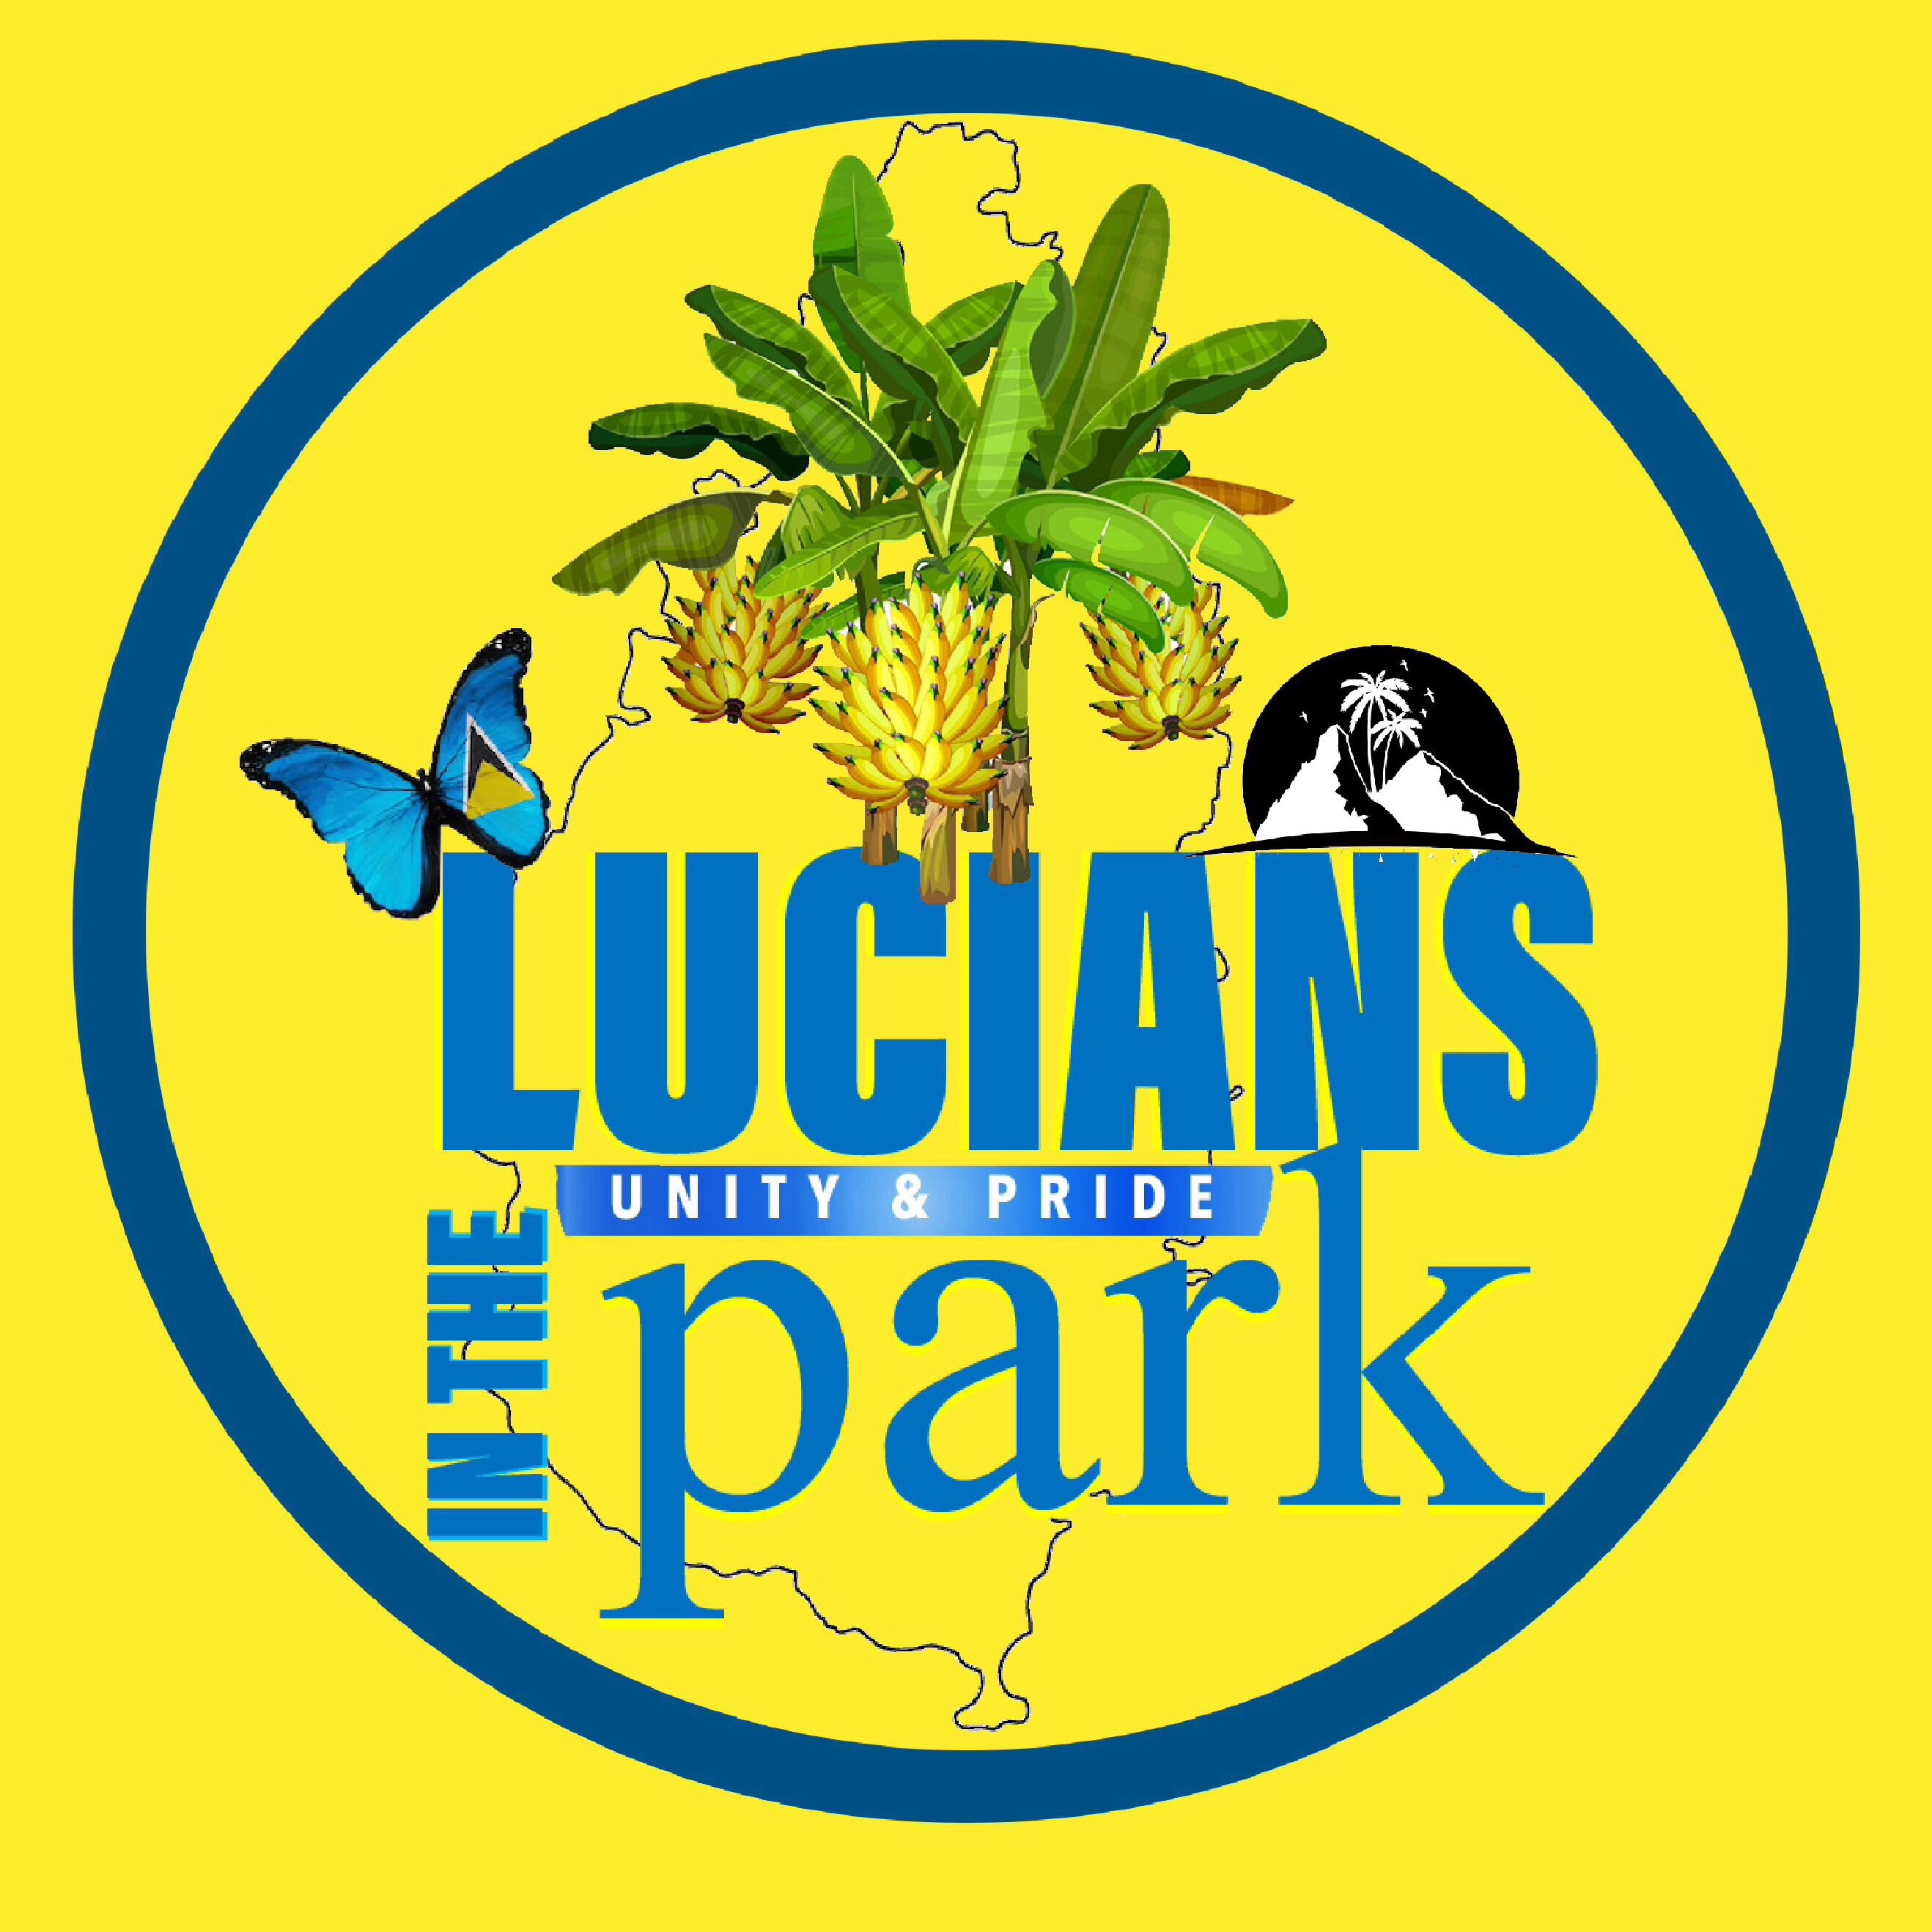 Lucians In The Park 